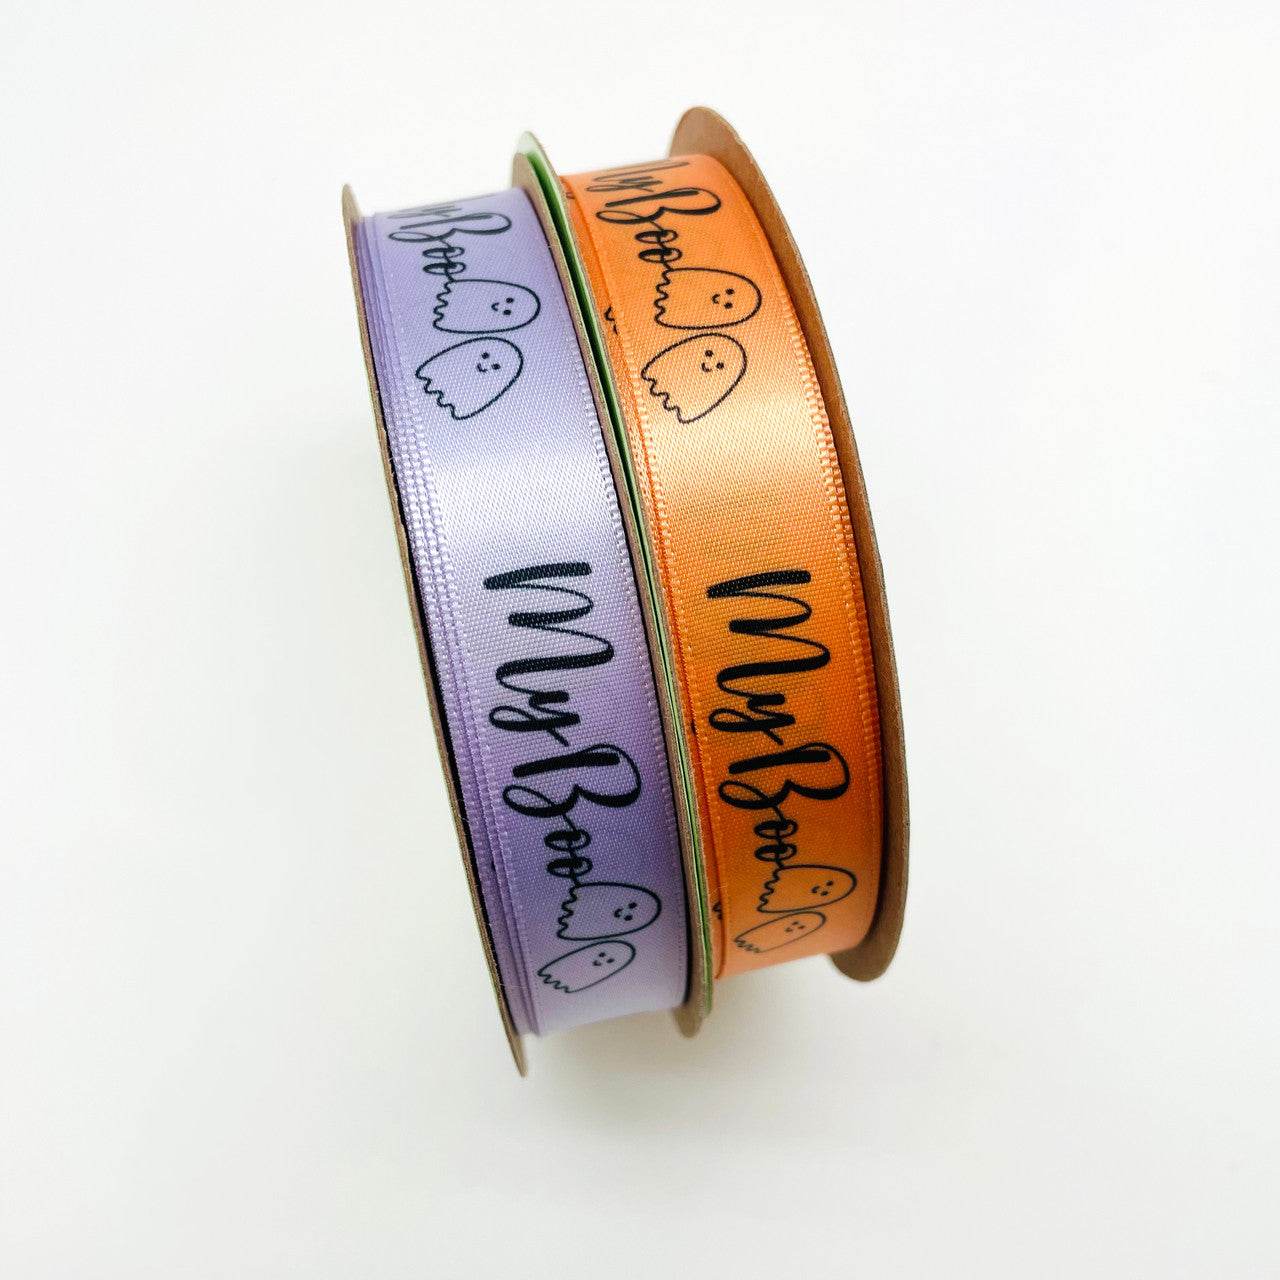 We offer this design on orange and lavender for all your Halloween Boos!